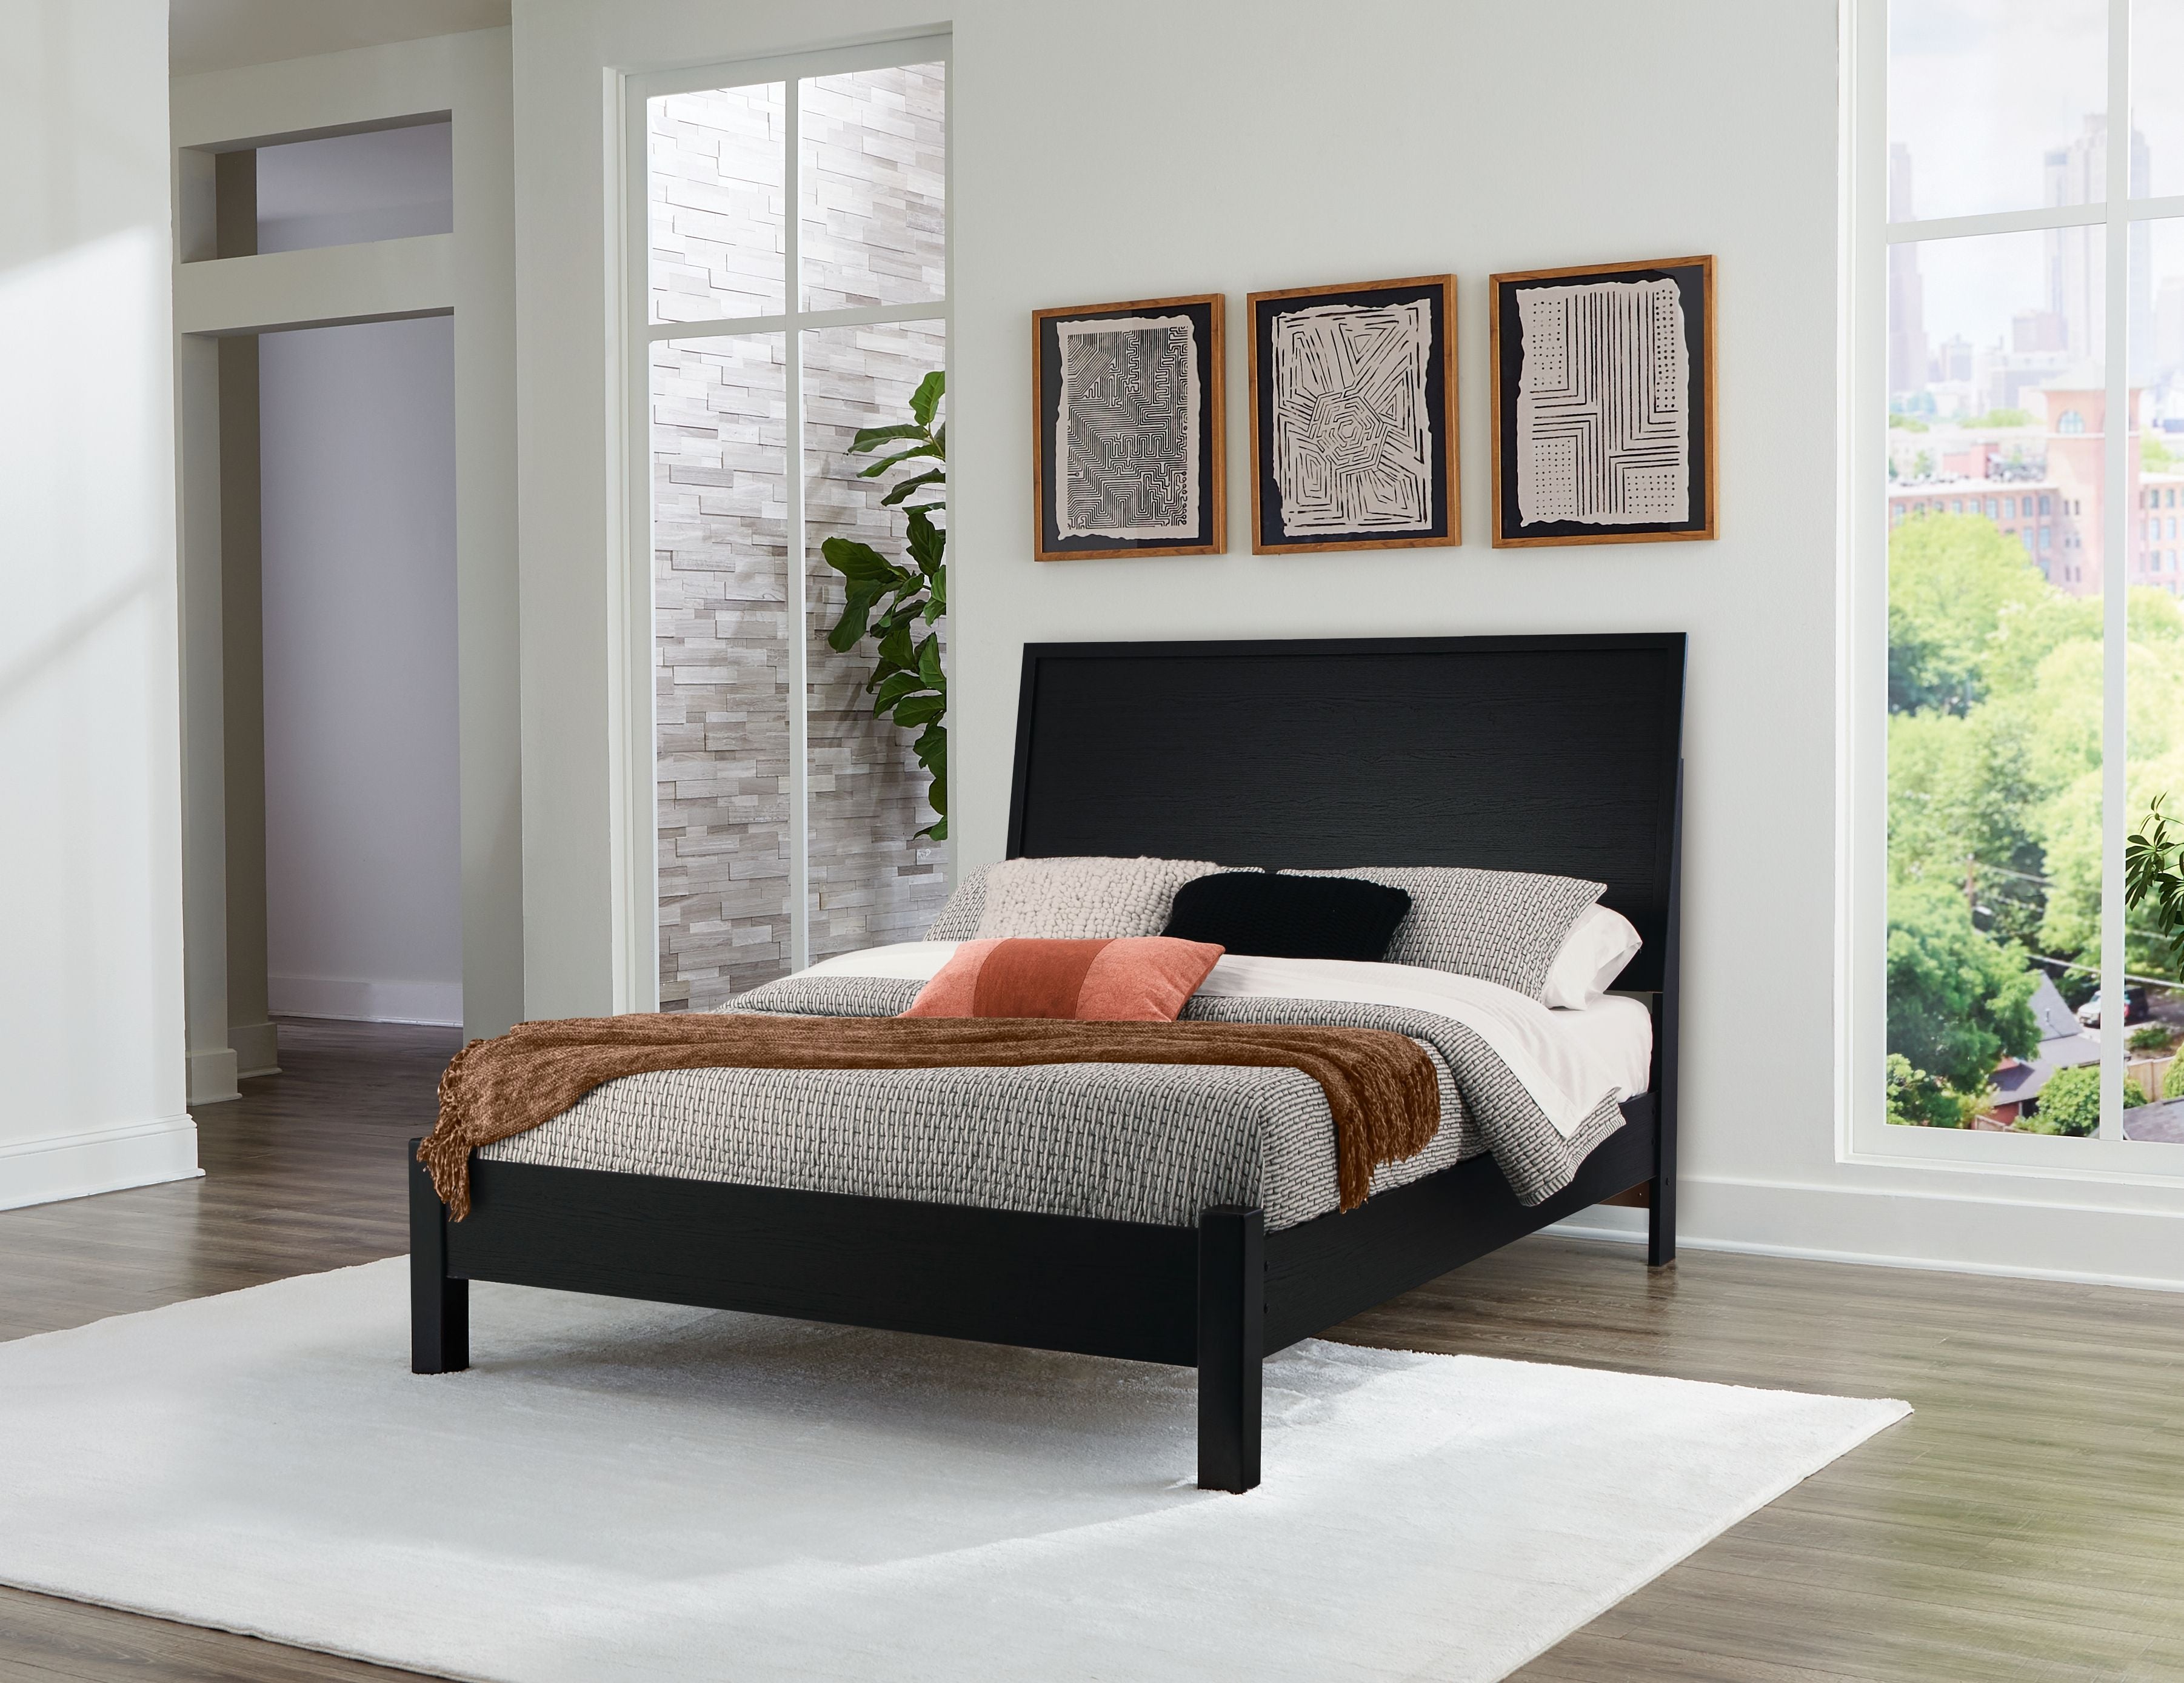 Danziar - Panel Bed With Low Footboard